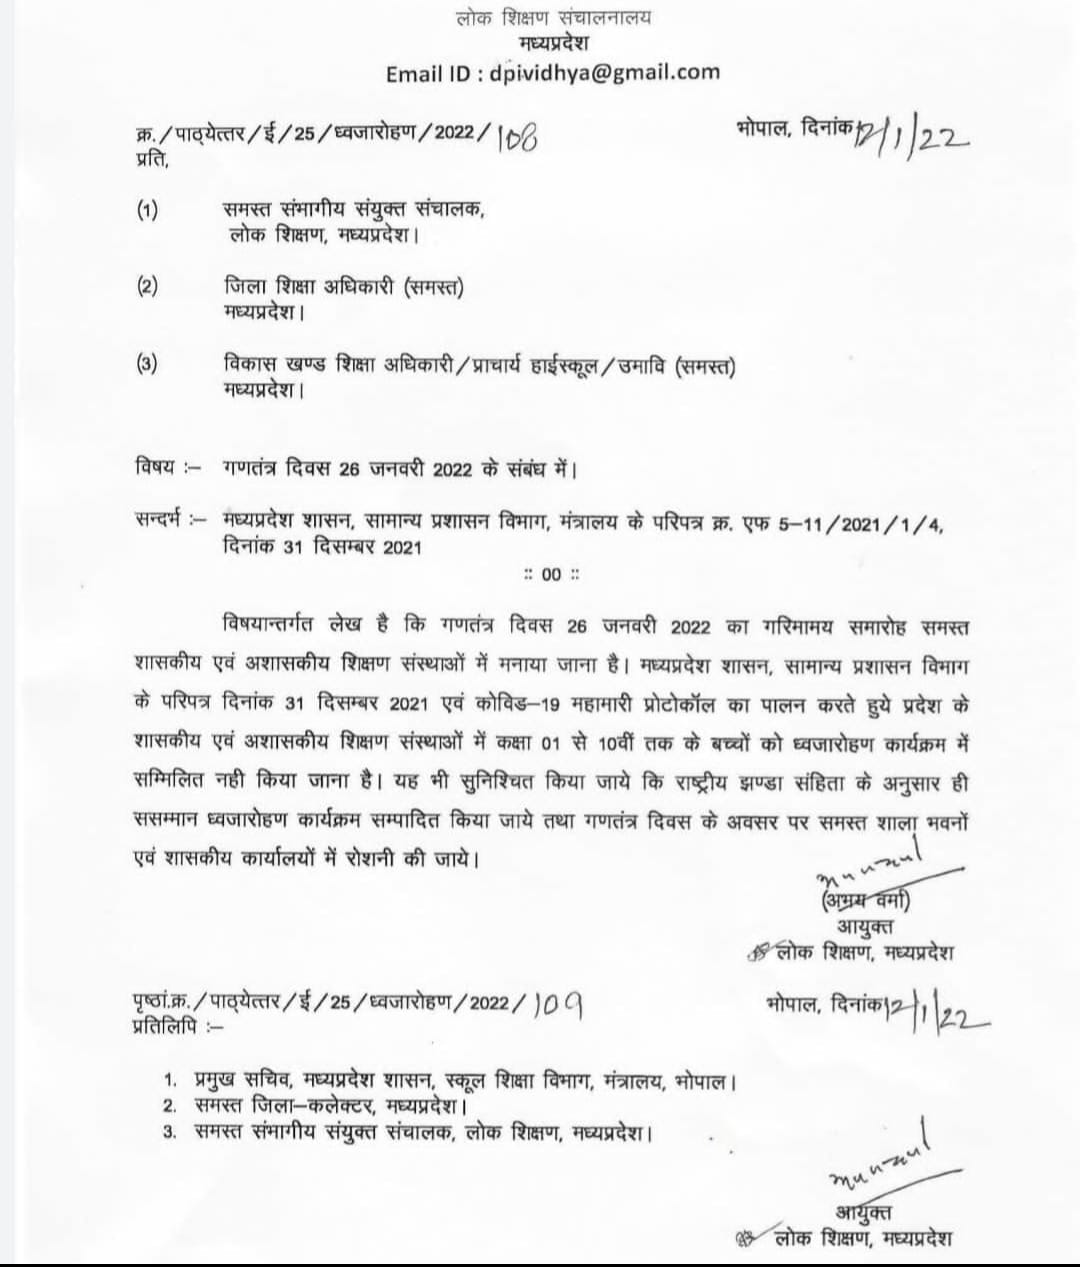 Order issued regarding the function of 26 January